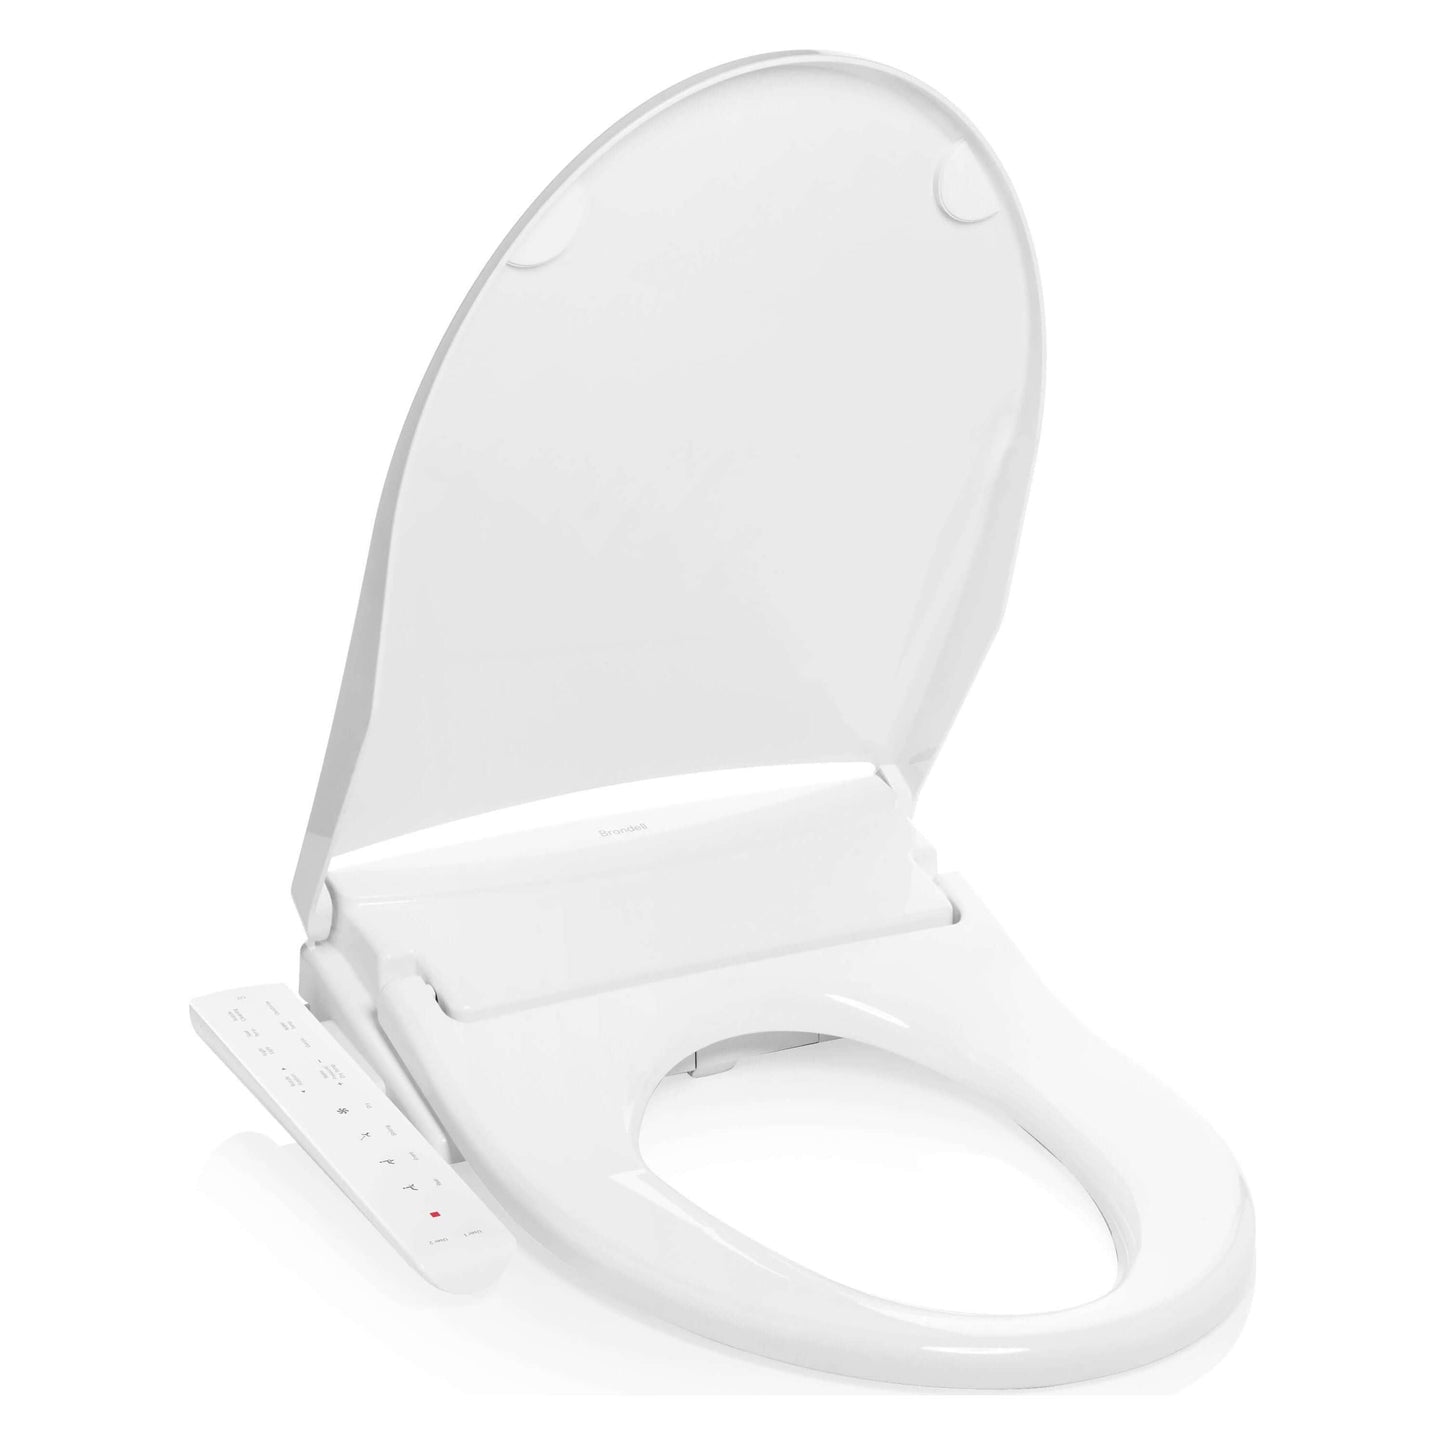 Swash Thinline T22 Bidet Seat - side angled view with lid open